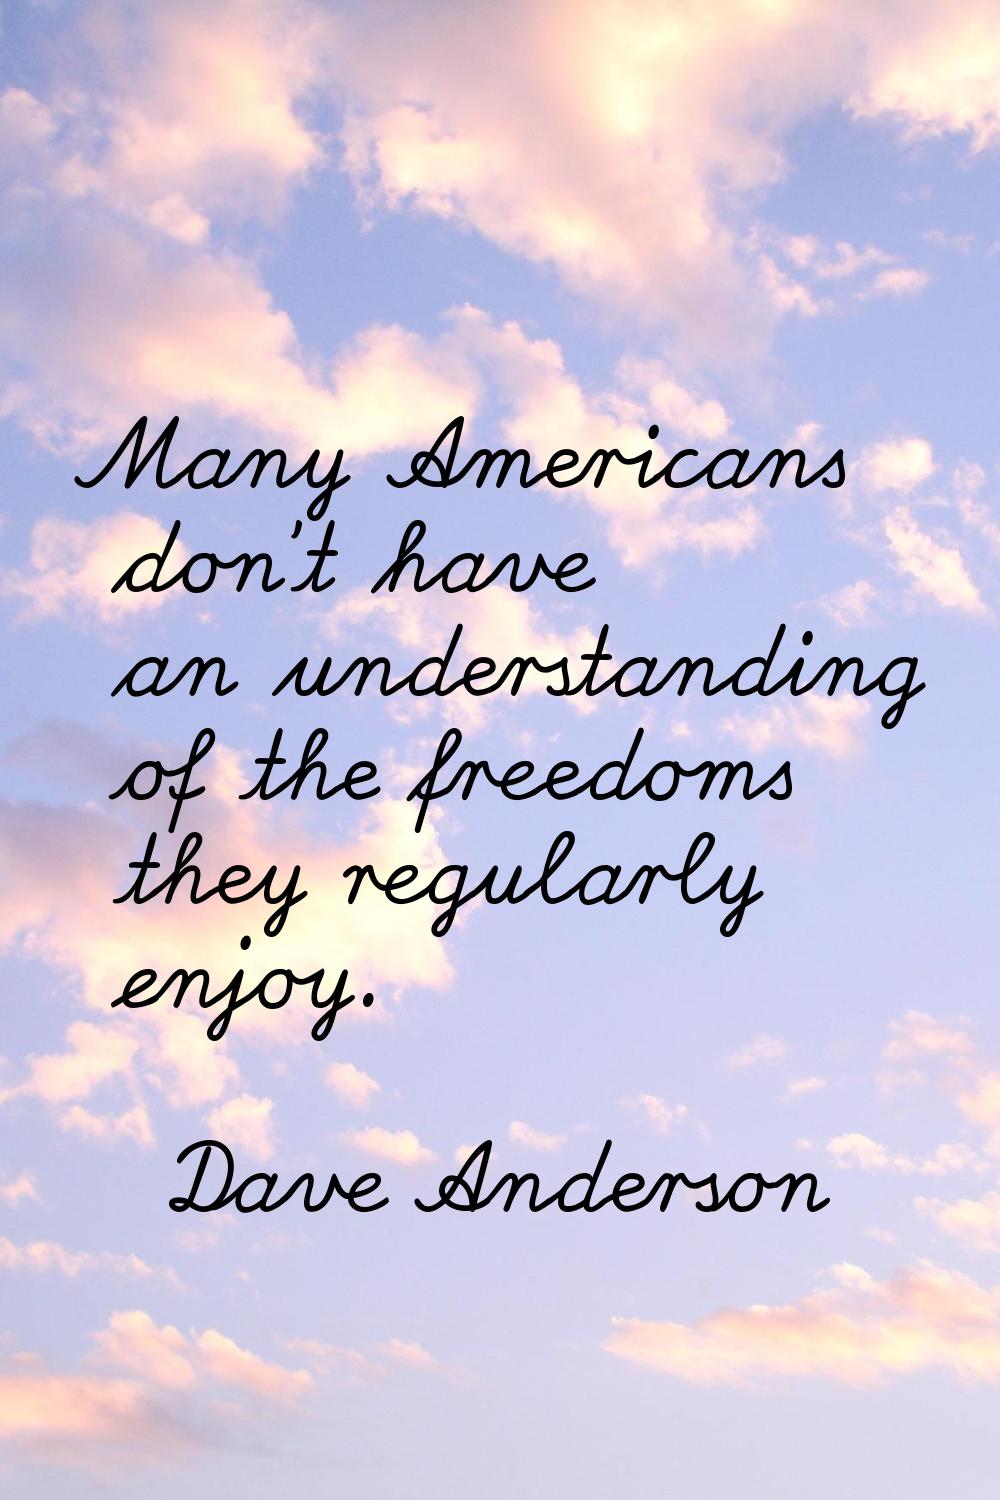 Many Americans don't have an understanding of the freedoms they regularly enjoy.